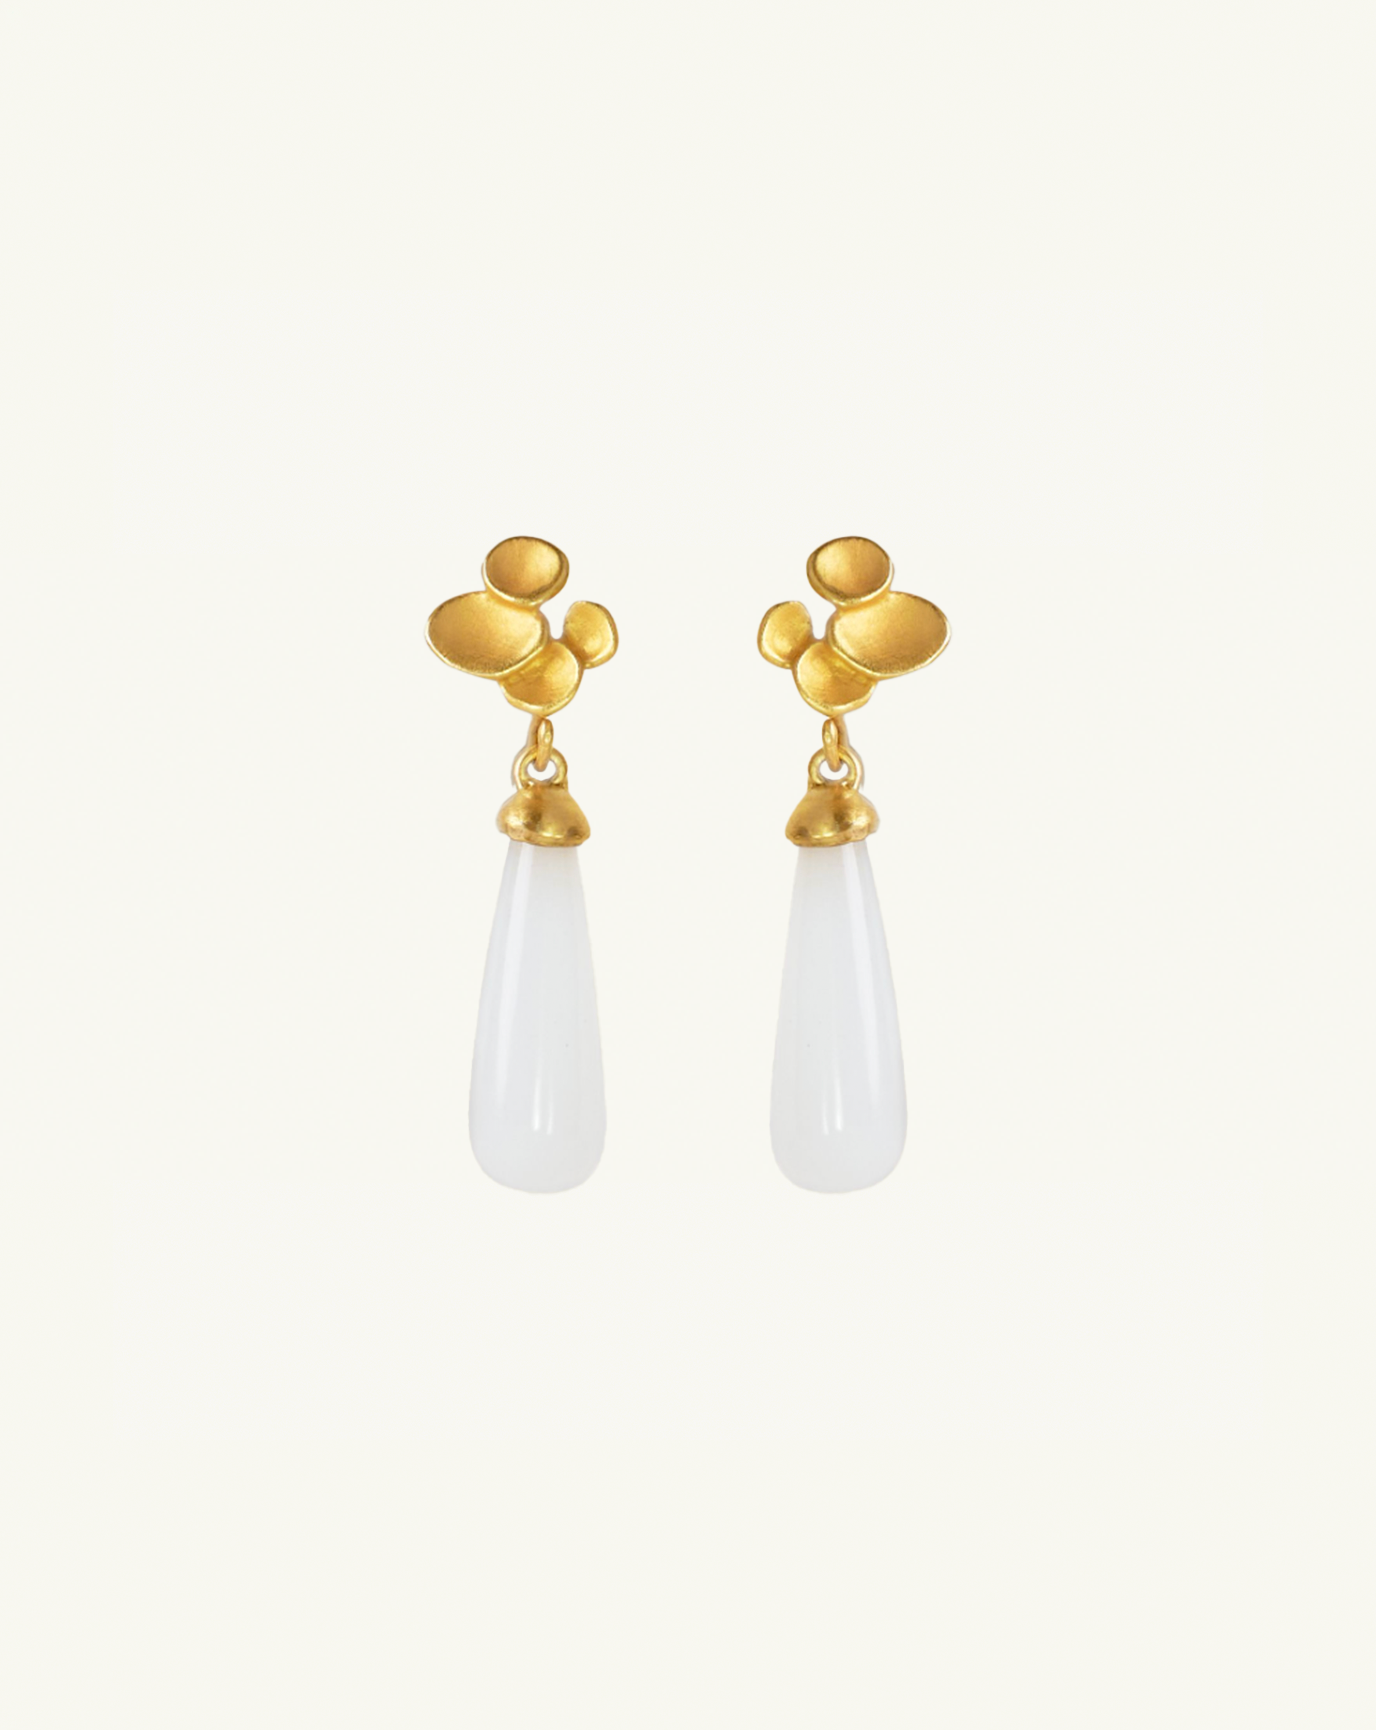 Product image of the white moonstone drop earrings with abstract climber studs attached